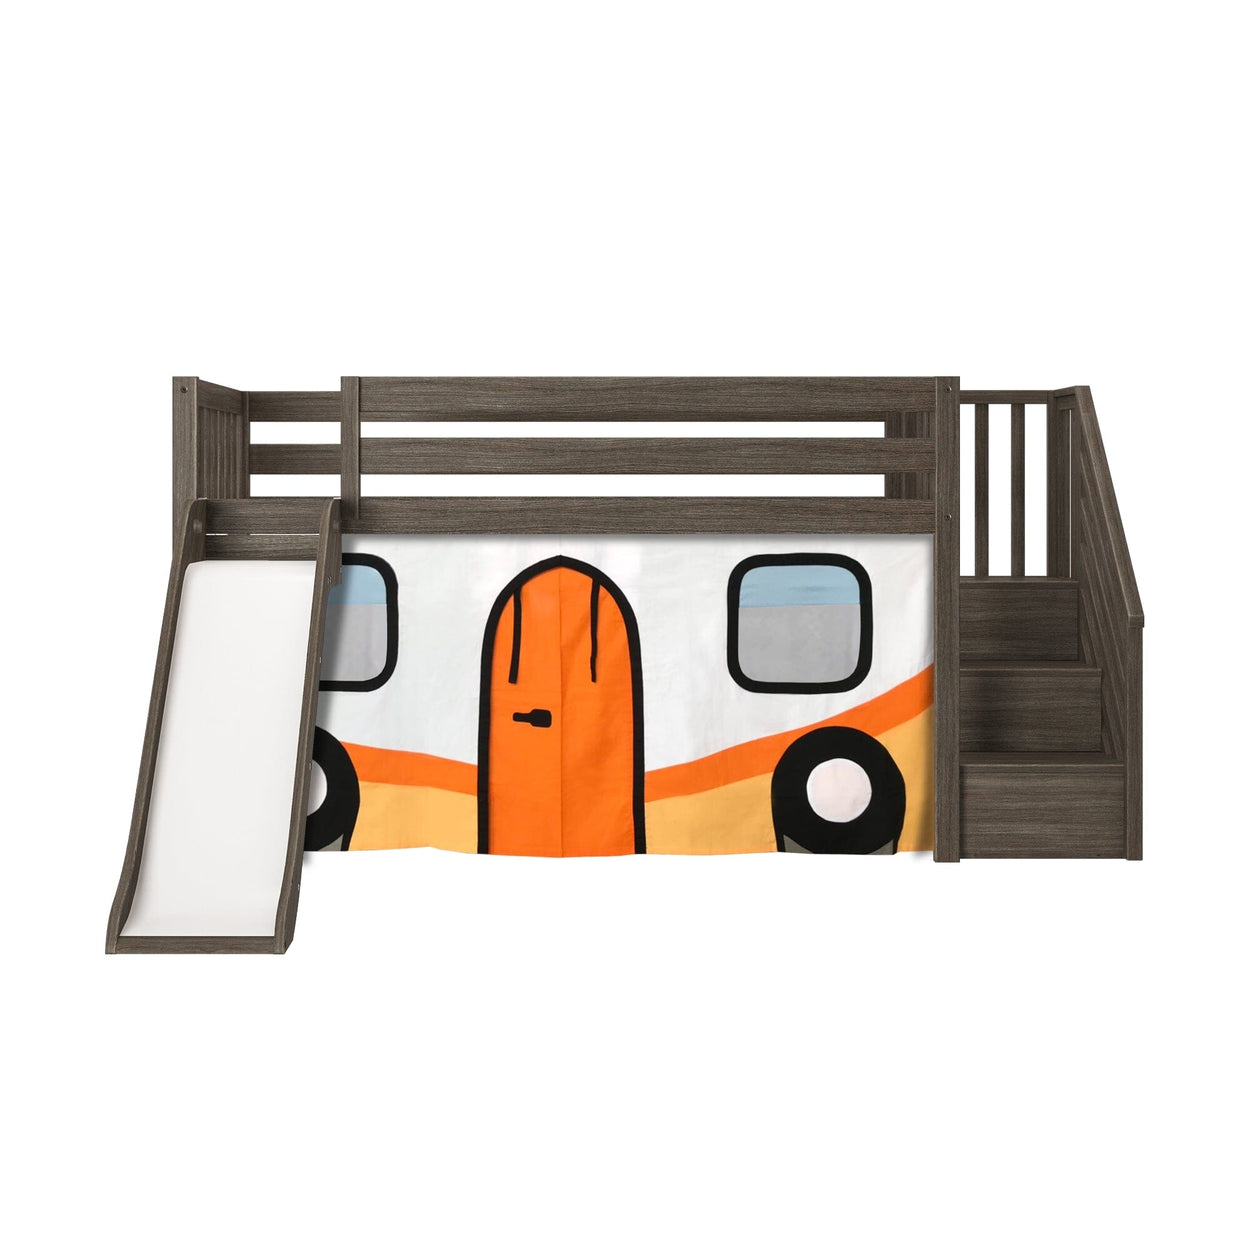 180425151067 : Loft Beds Low Loft with Stairs, Easy Slide and Orange Camper Van Curtain, Clay